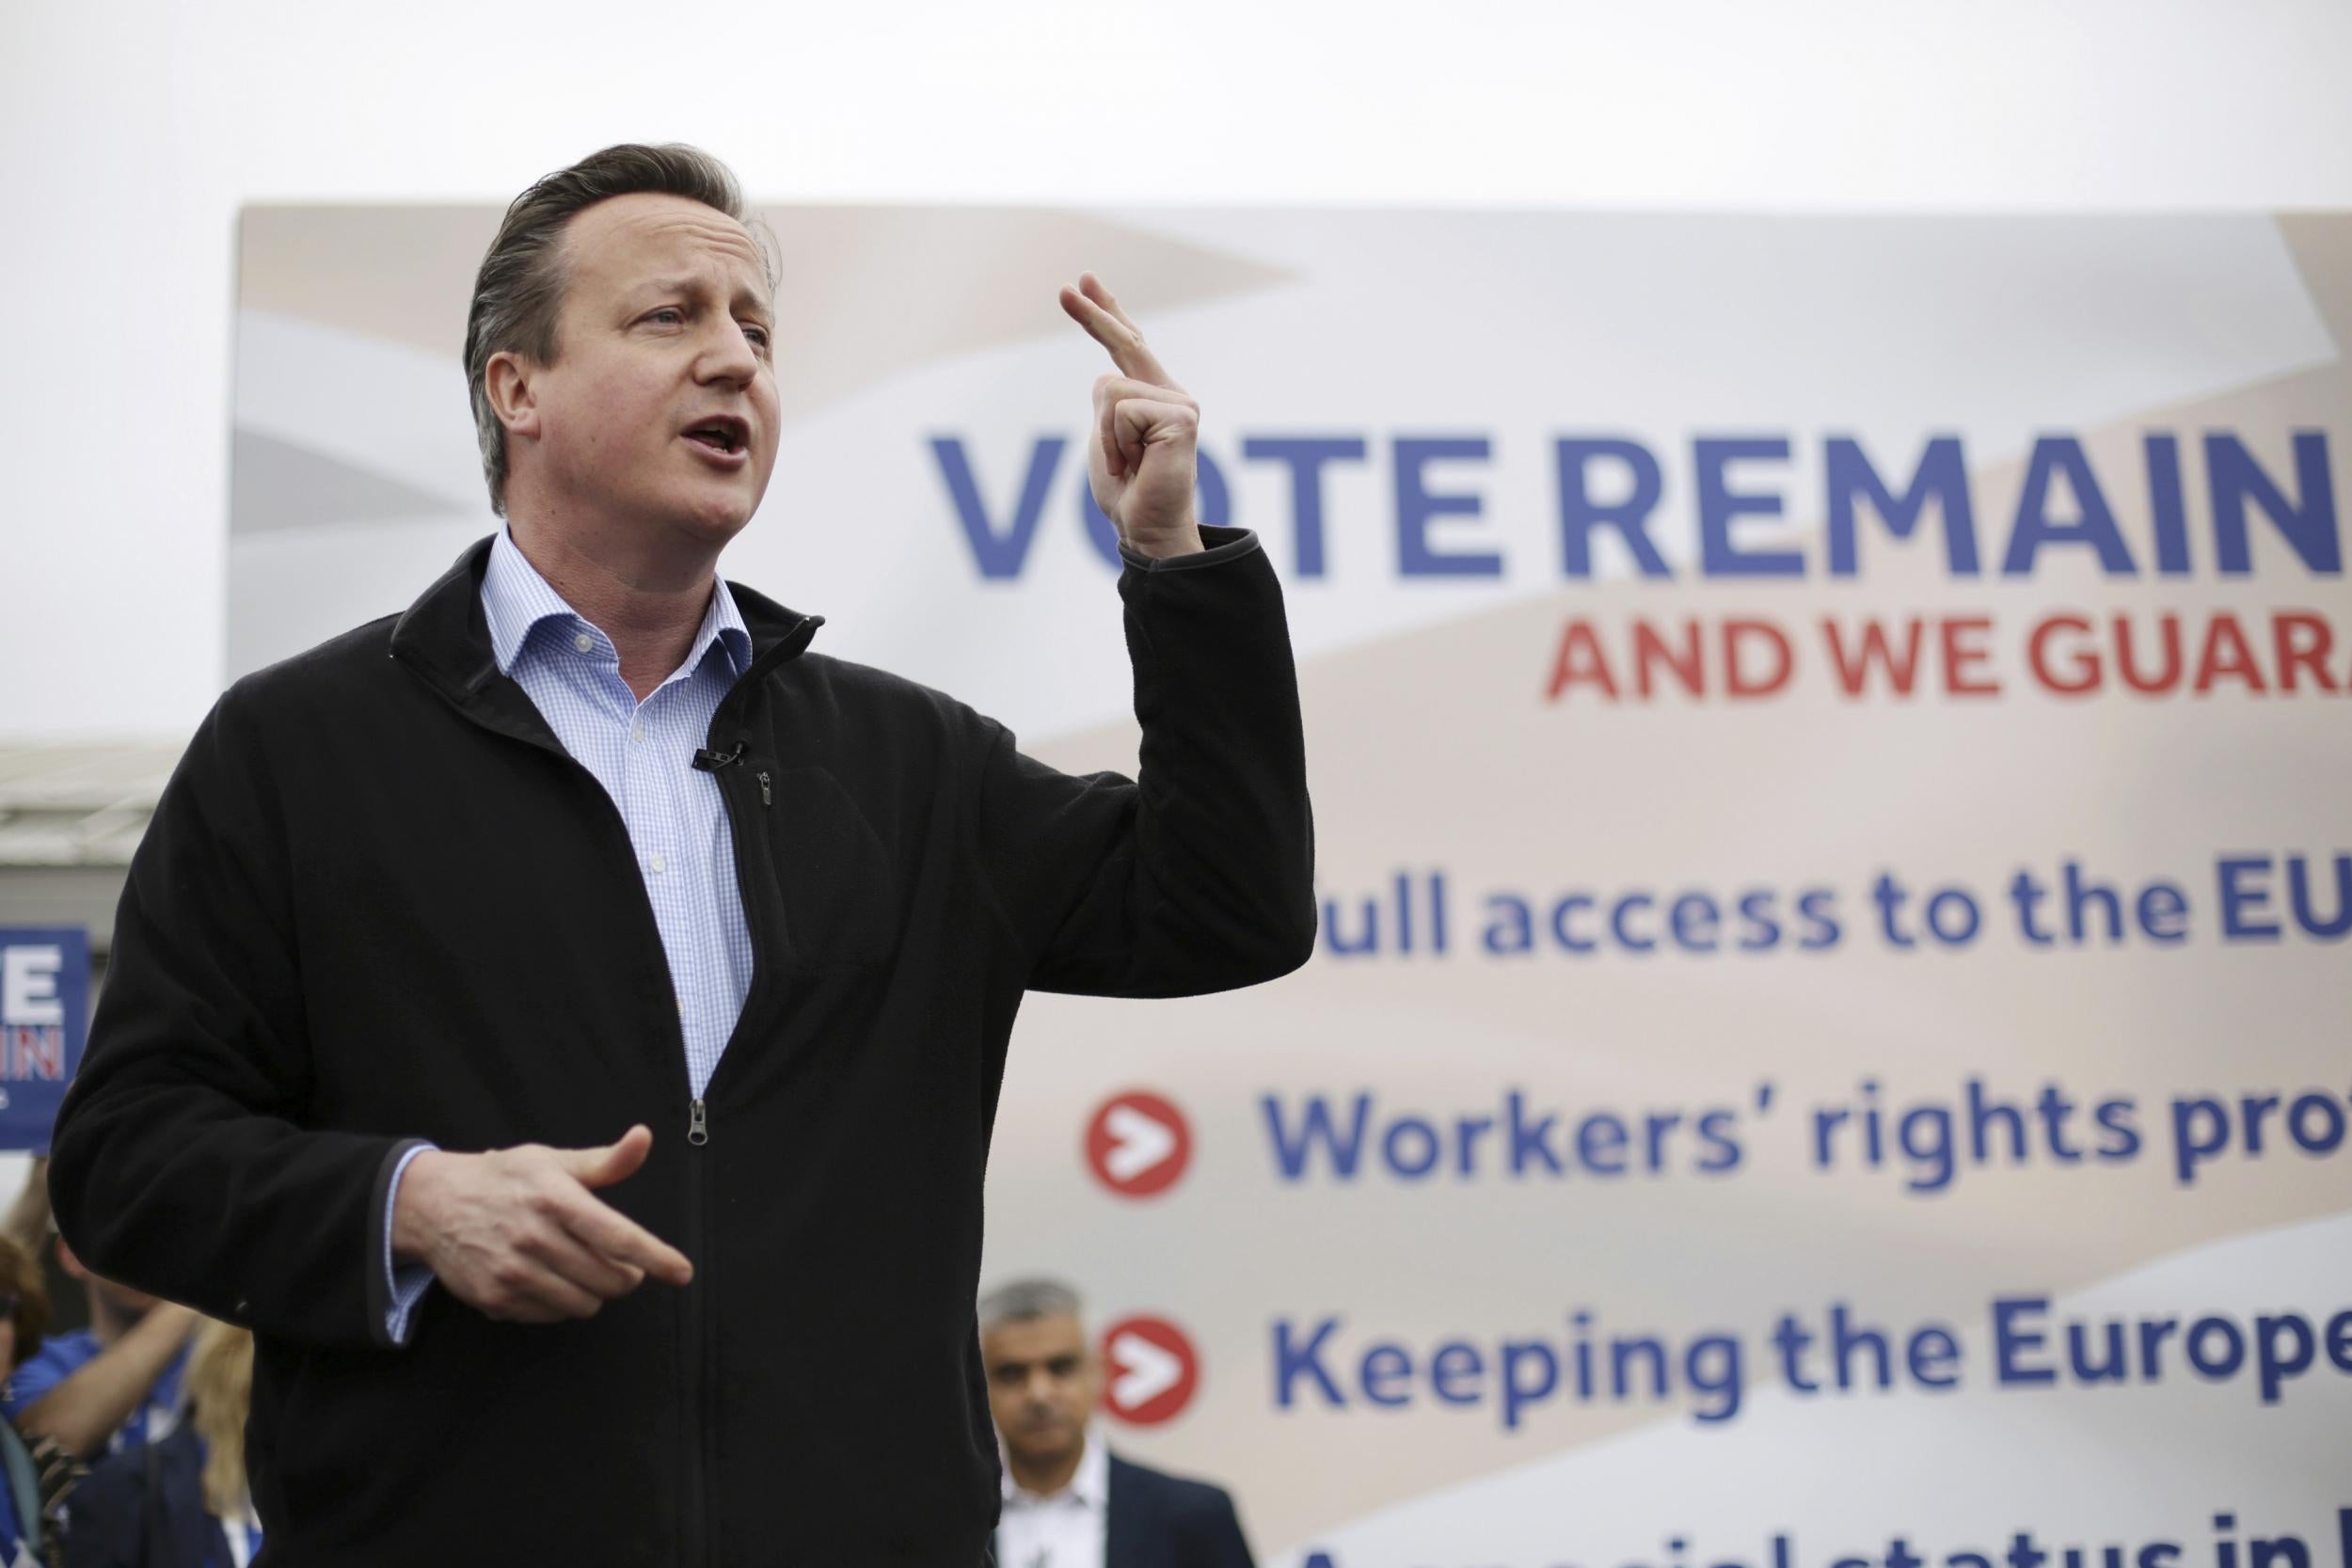 Mr Cameron came under a sustained attack from members of his own party suggesting he should quit over the weekend